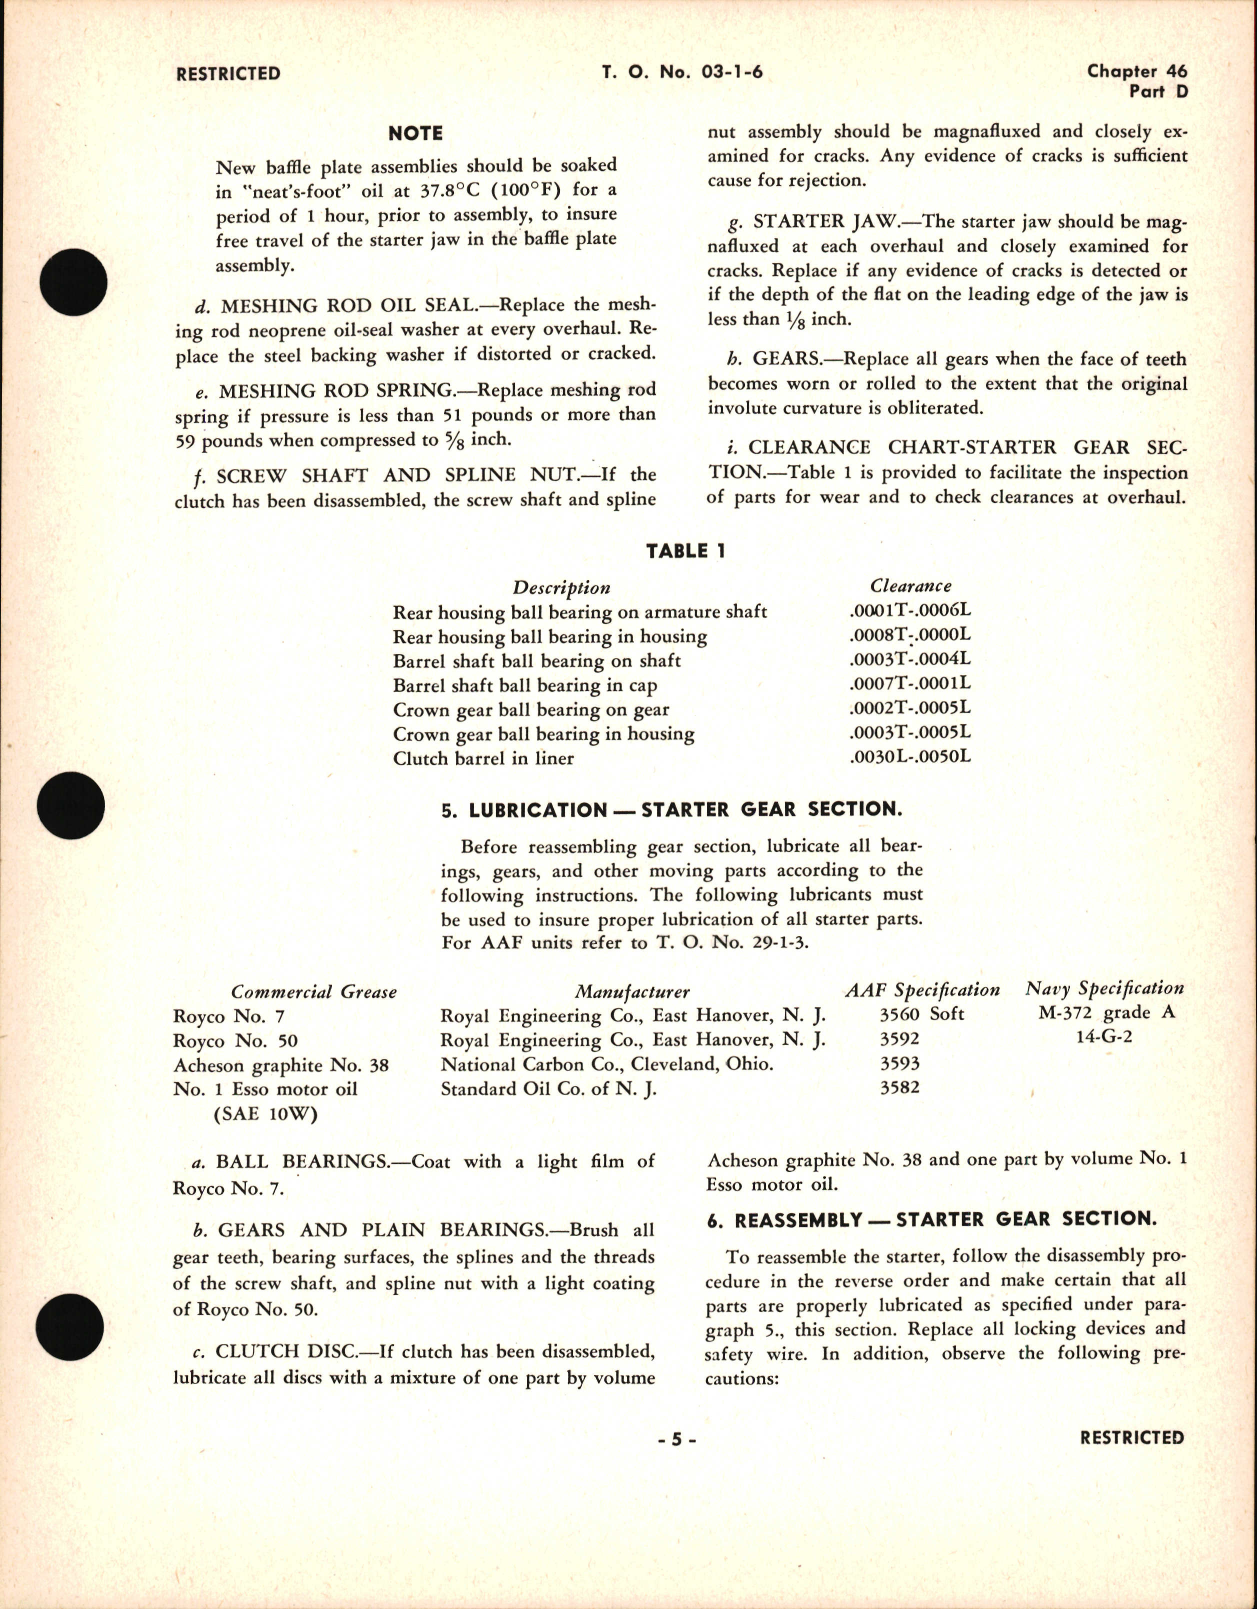 Sample page 5 from AirCorps Library document: Overhaul Instructions for Direct Cranking Electric Starters, Chapter 46 Part D